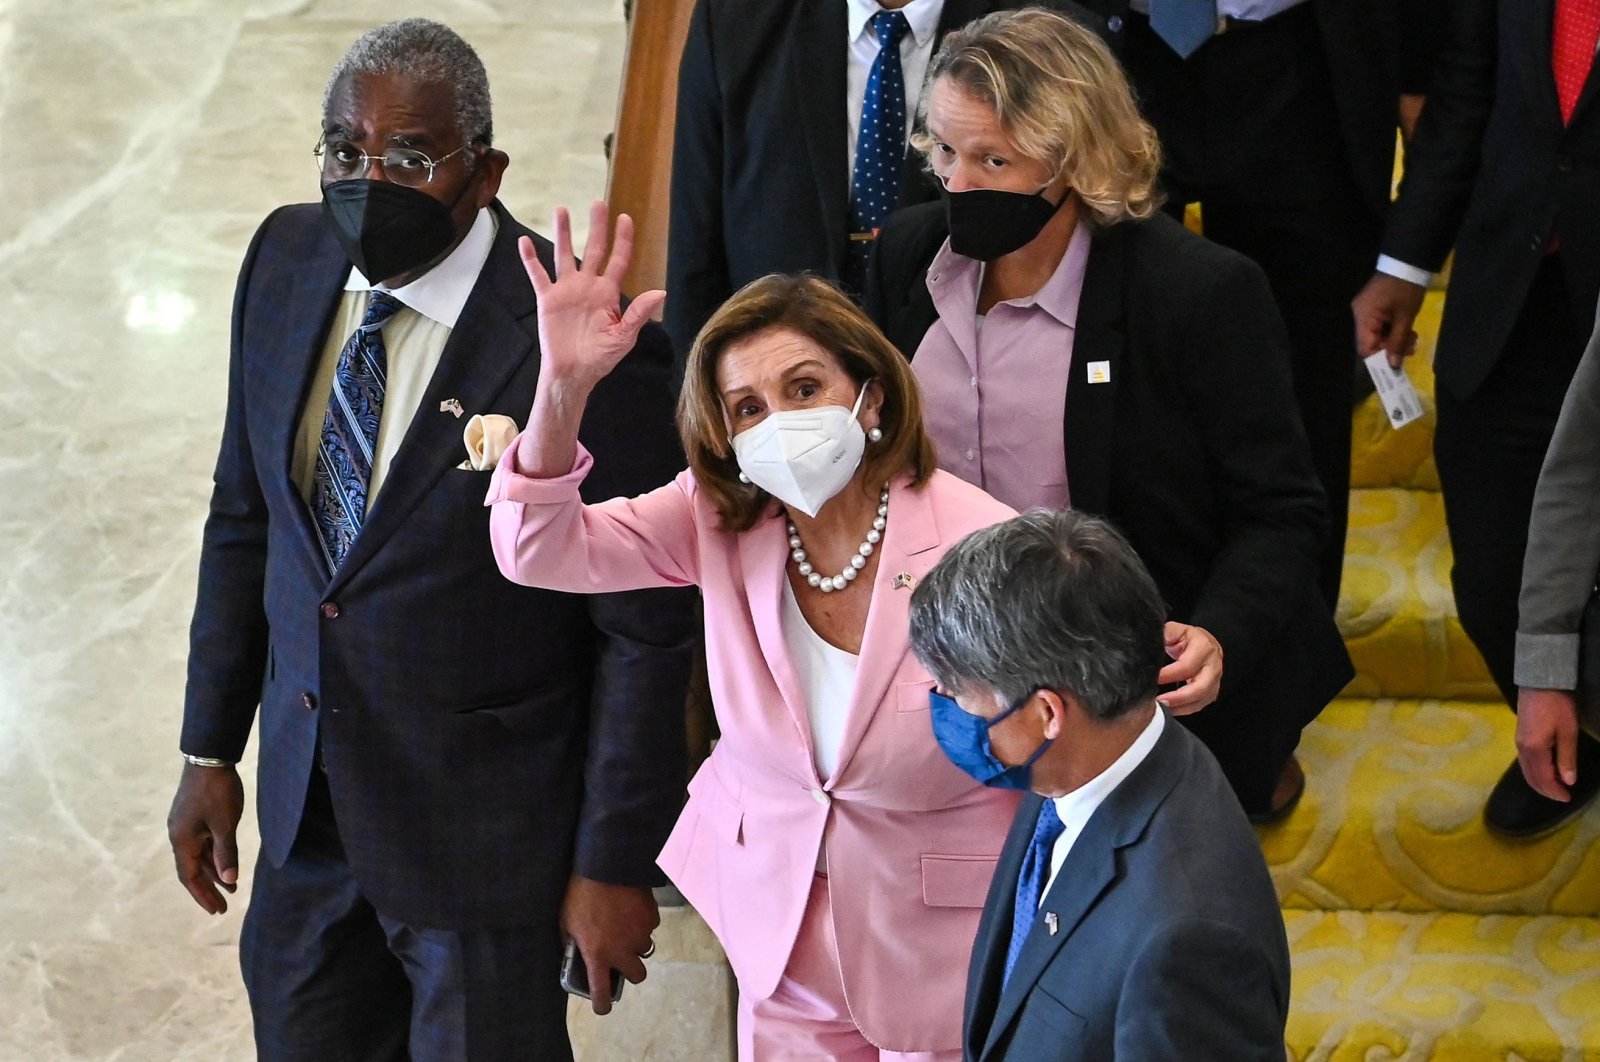 U.S. House of Representatives Speaker Nancy Pelosi waves as she leaves Malaysia&#039;s Parliament after a meeting with Malaysian officials in Kuala Lumpur, Malaysia, Aug. 2, 2022. (Malaysia Department of Information via AFP)